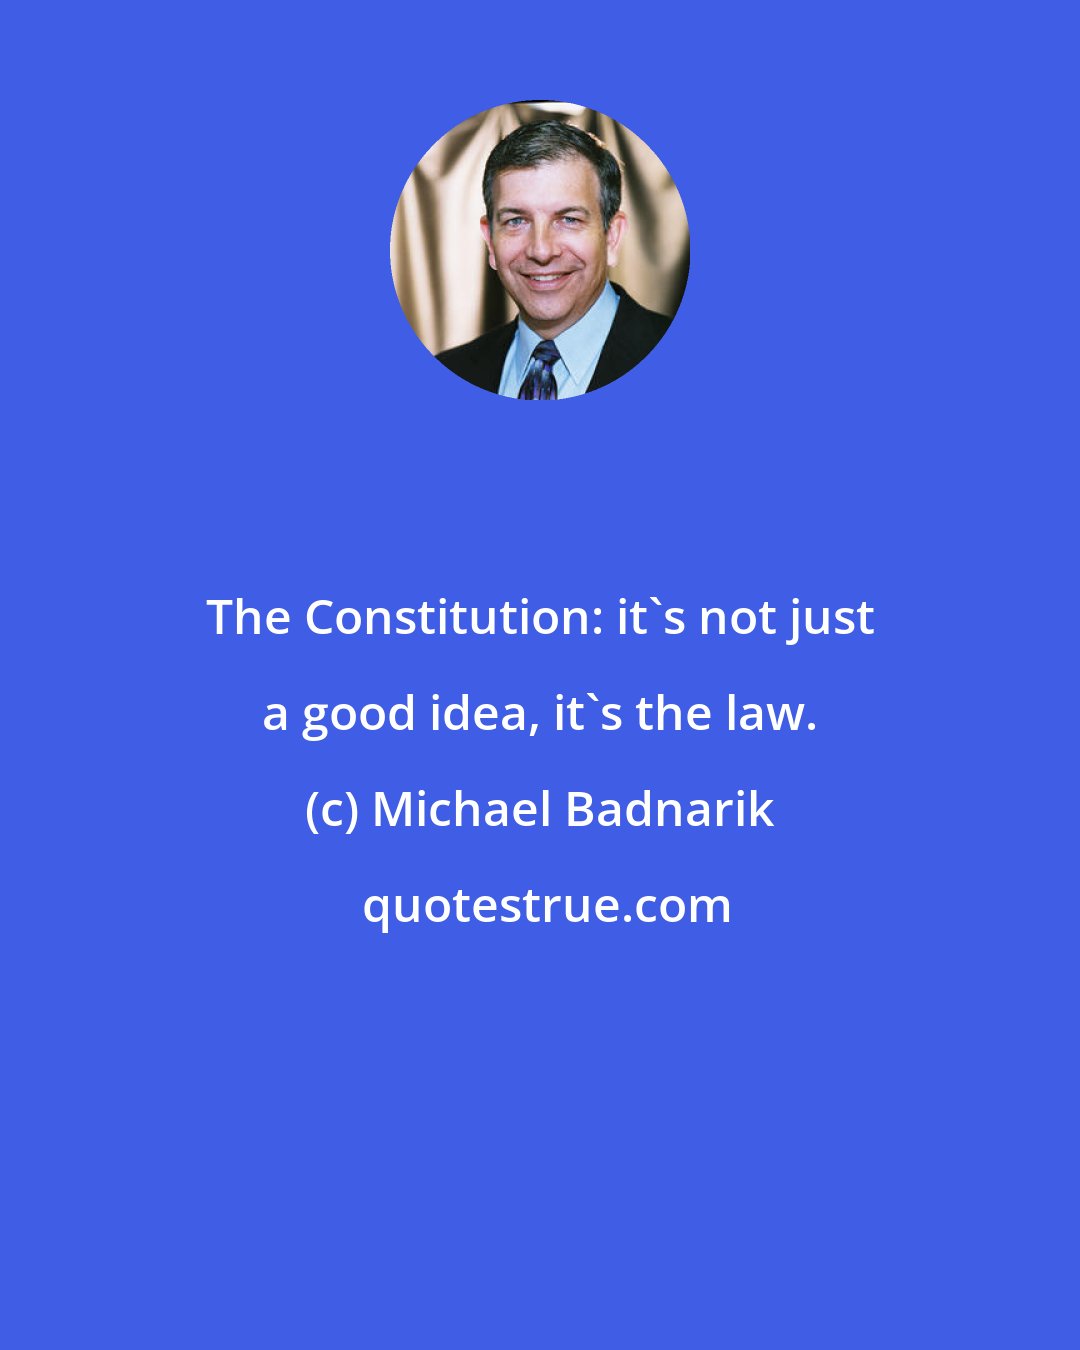 Michael Badnarik: The Constitution: it's not just a good idea, it's the law.